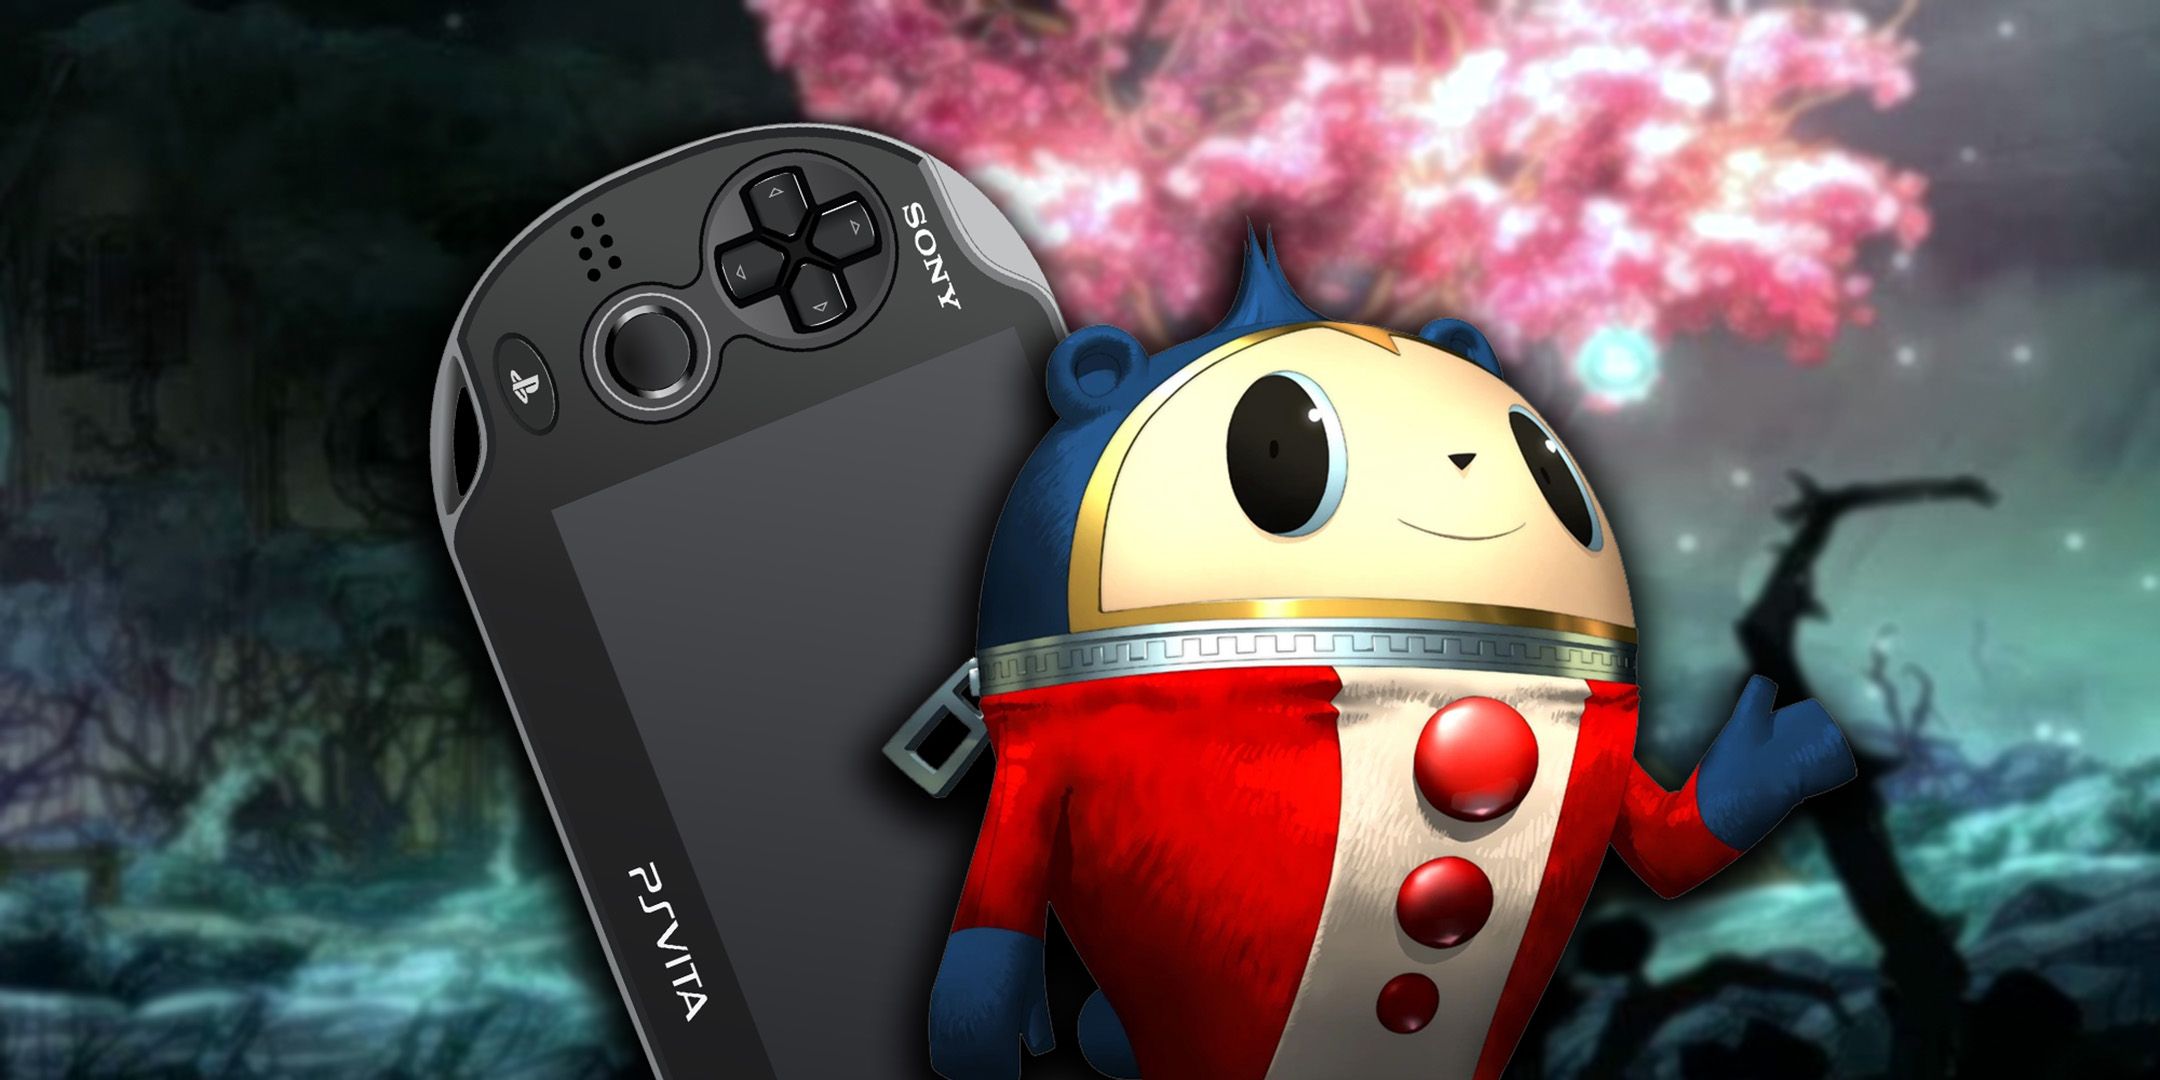 Teddie from Persona 4 standing next to a Vita in the world of Child of Light